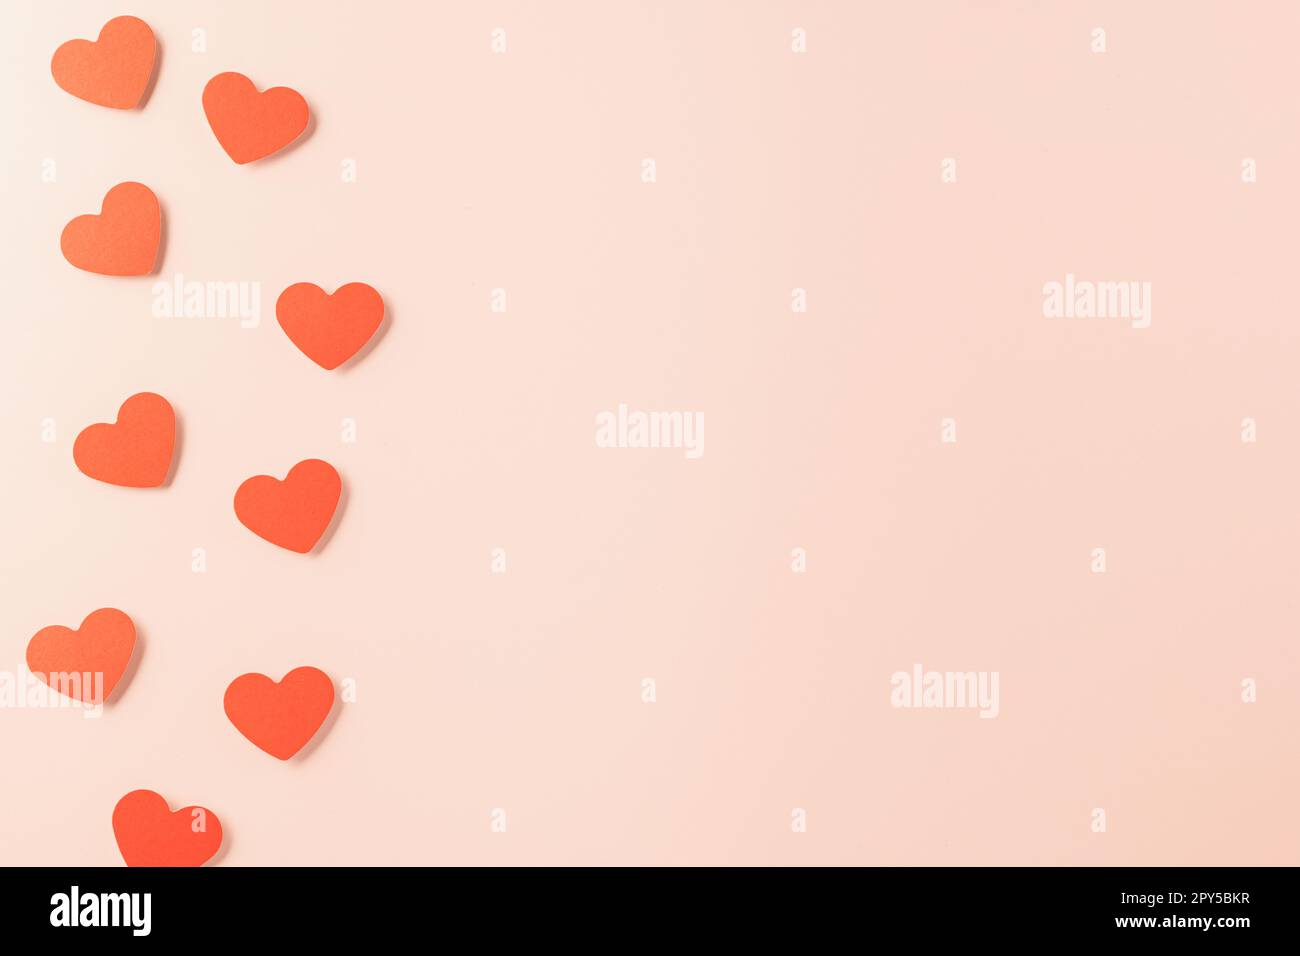 Beautiful red paper hearts shape cutting pastel pink background Stock Photo